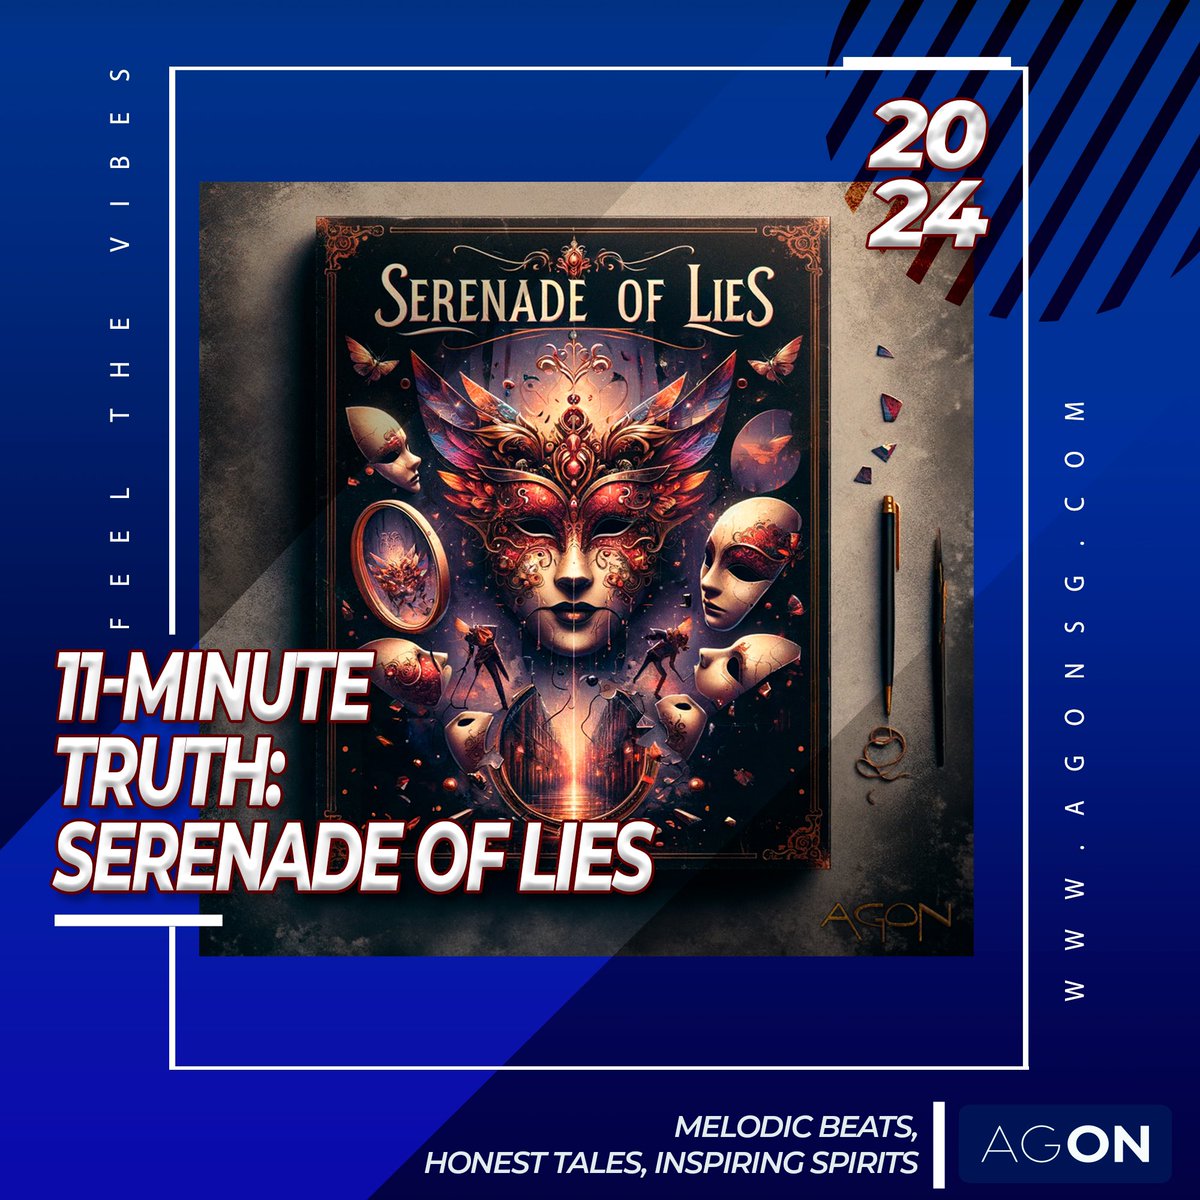 It's happening! '𝗦𝗲𝗿𝗲𝗻𝗮𝗱𝗲 𝗼𝗳 𝗟𝗶𝗲𝘀' is on the way. Get ready for a hip-hop track that's all about the truth. No curses, just raw, unfiltered stories. Dropping soon!
#SerenadeOfLies #HipHop #AGON #MusicAnnouncement